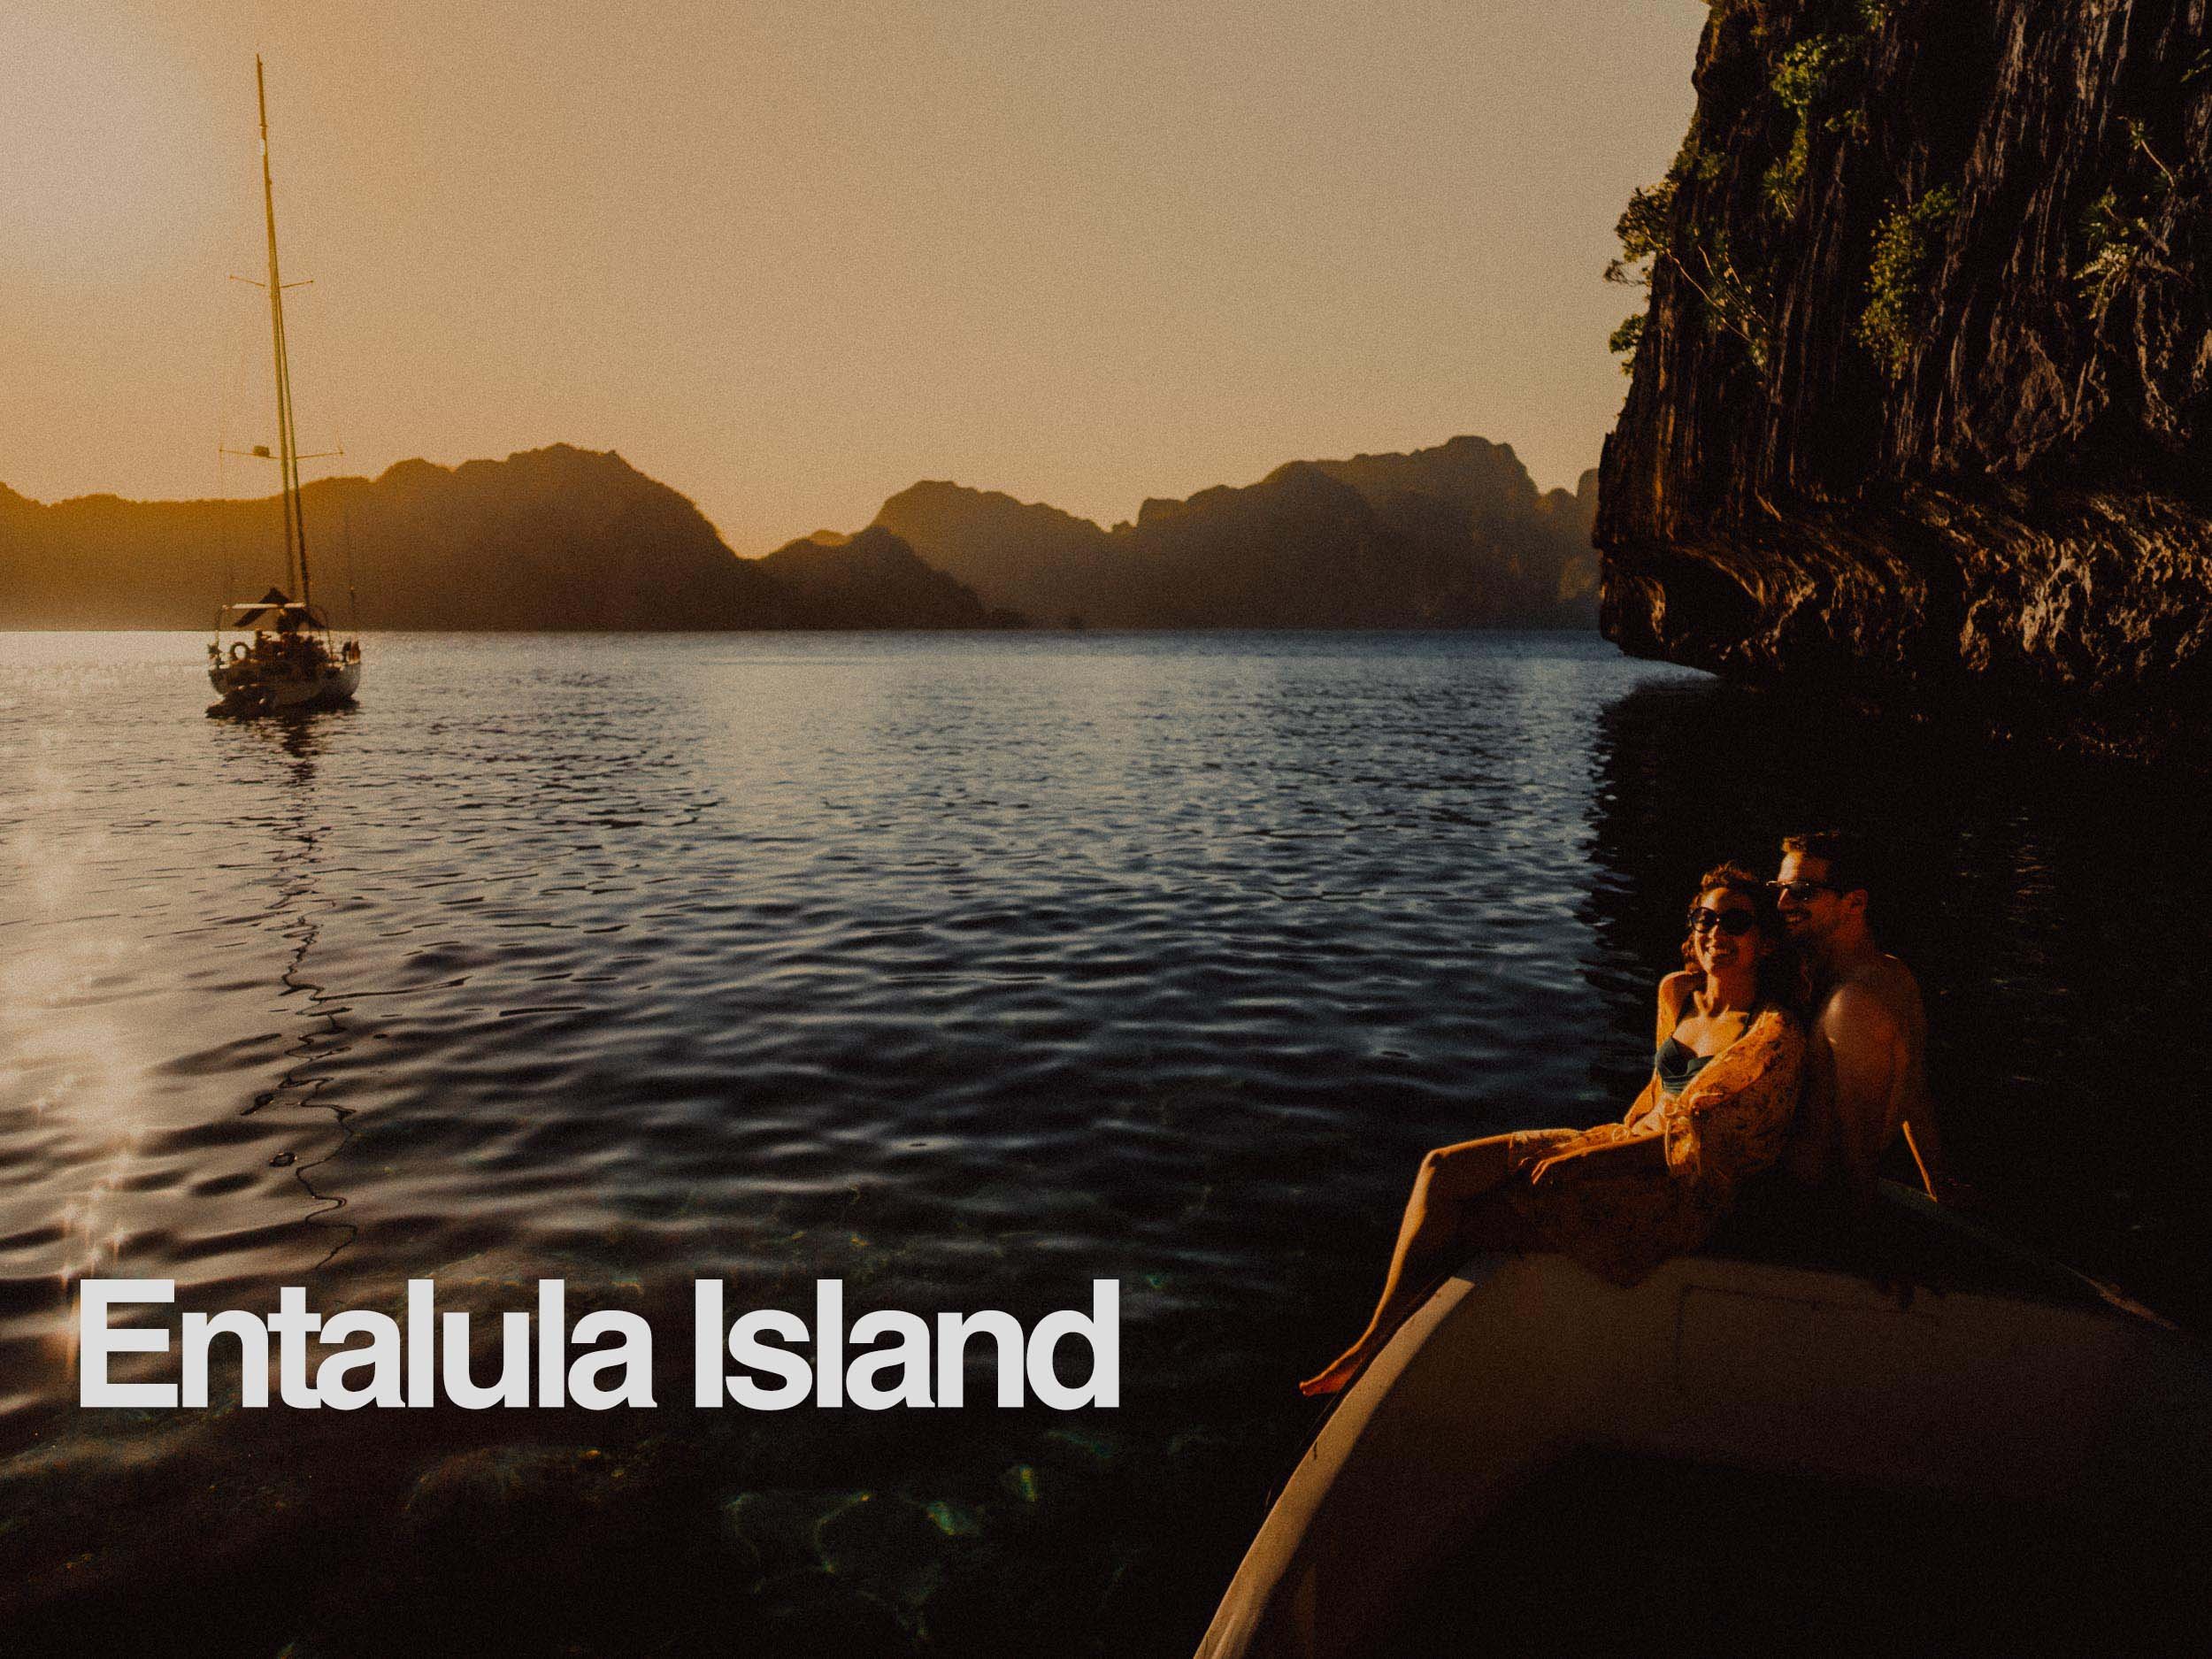 1-Entalula Island El Nido Palawan Philippines-Chill adventure couple portraits in Entalula Island's secluded west-facing beach just moments before sunset, El Nido, Palawan, Philippines, Southeast Asia, April 2019, Sony Alpha.jpg